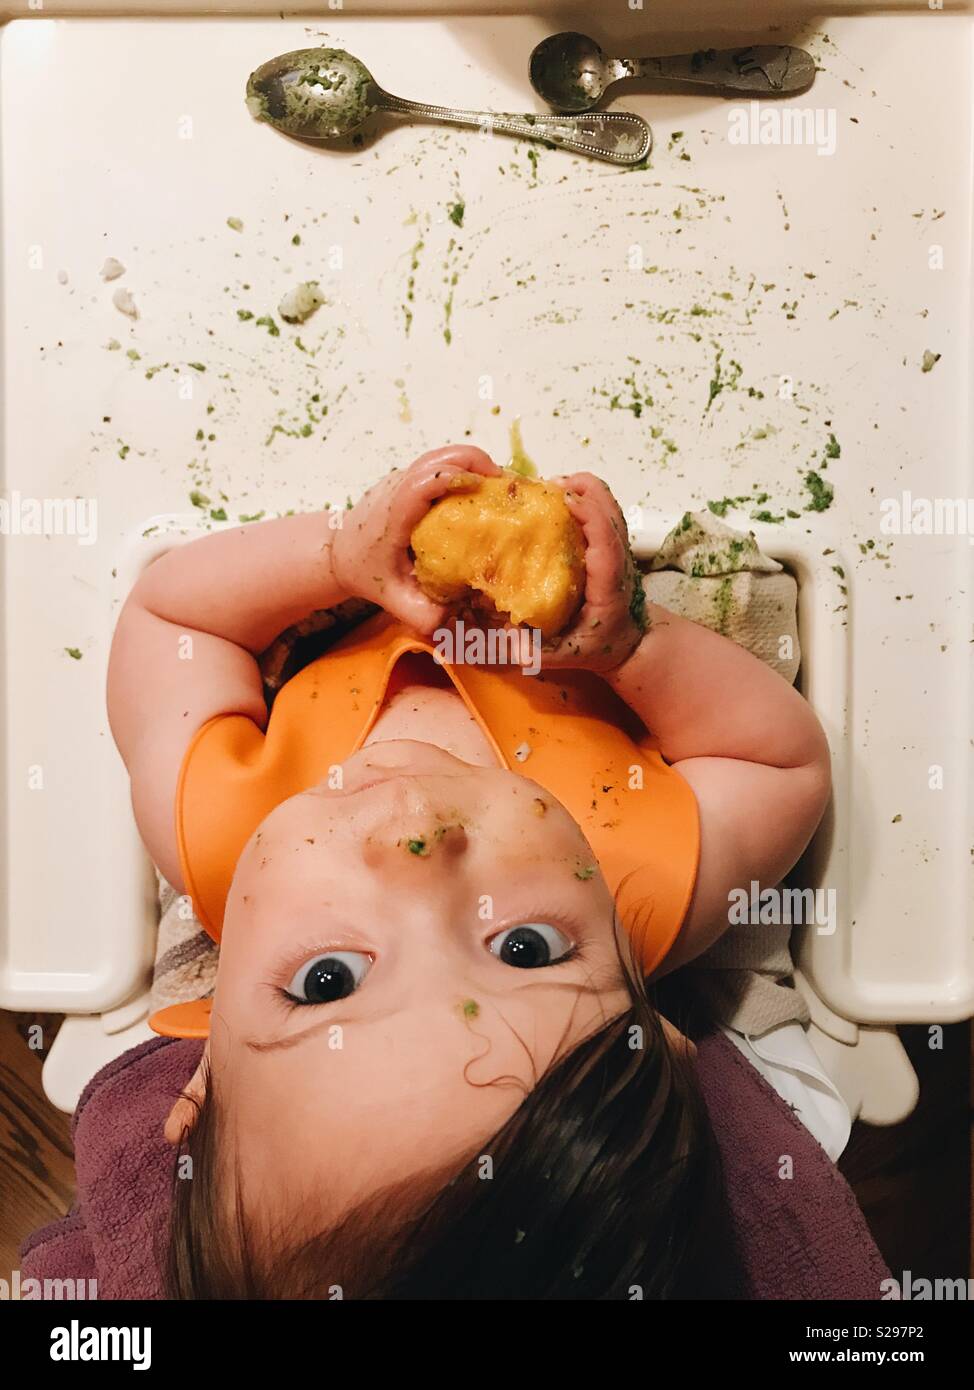 Overhead view of a baby girl sitting in a high chair eating a peach. Stock Photo